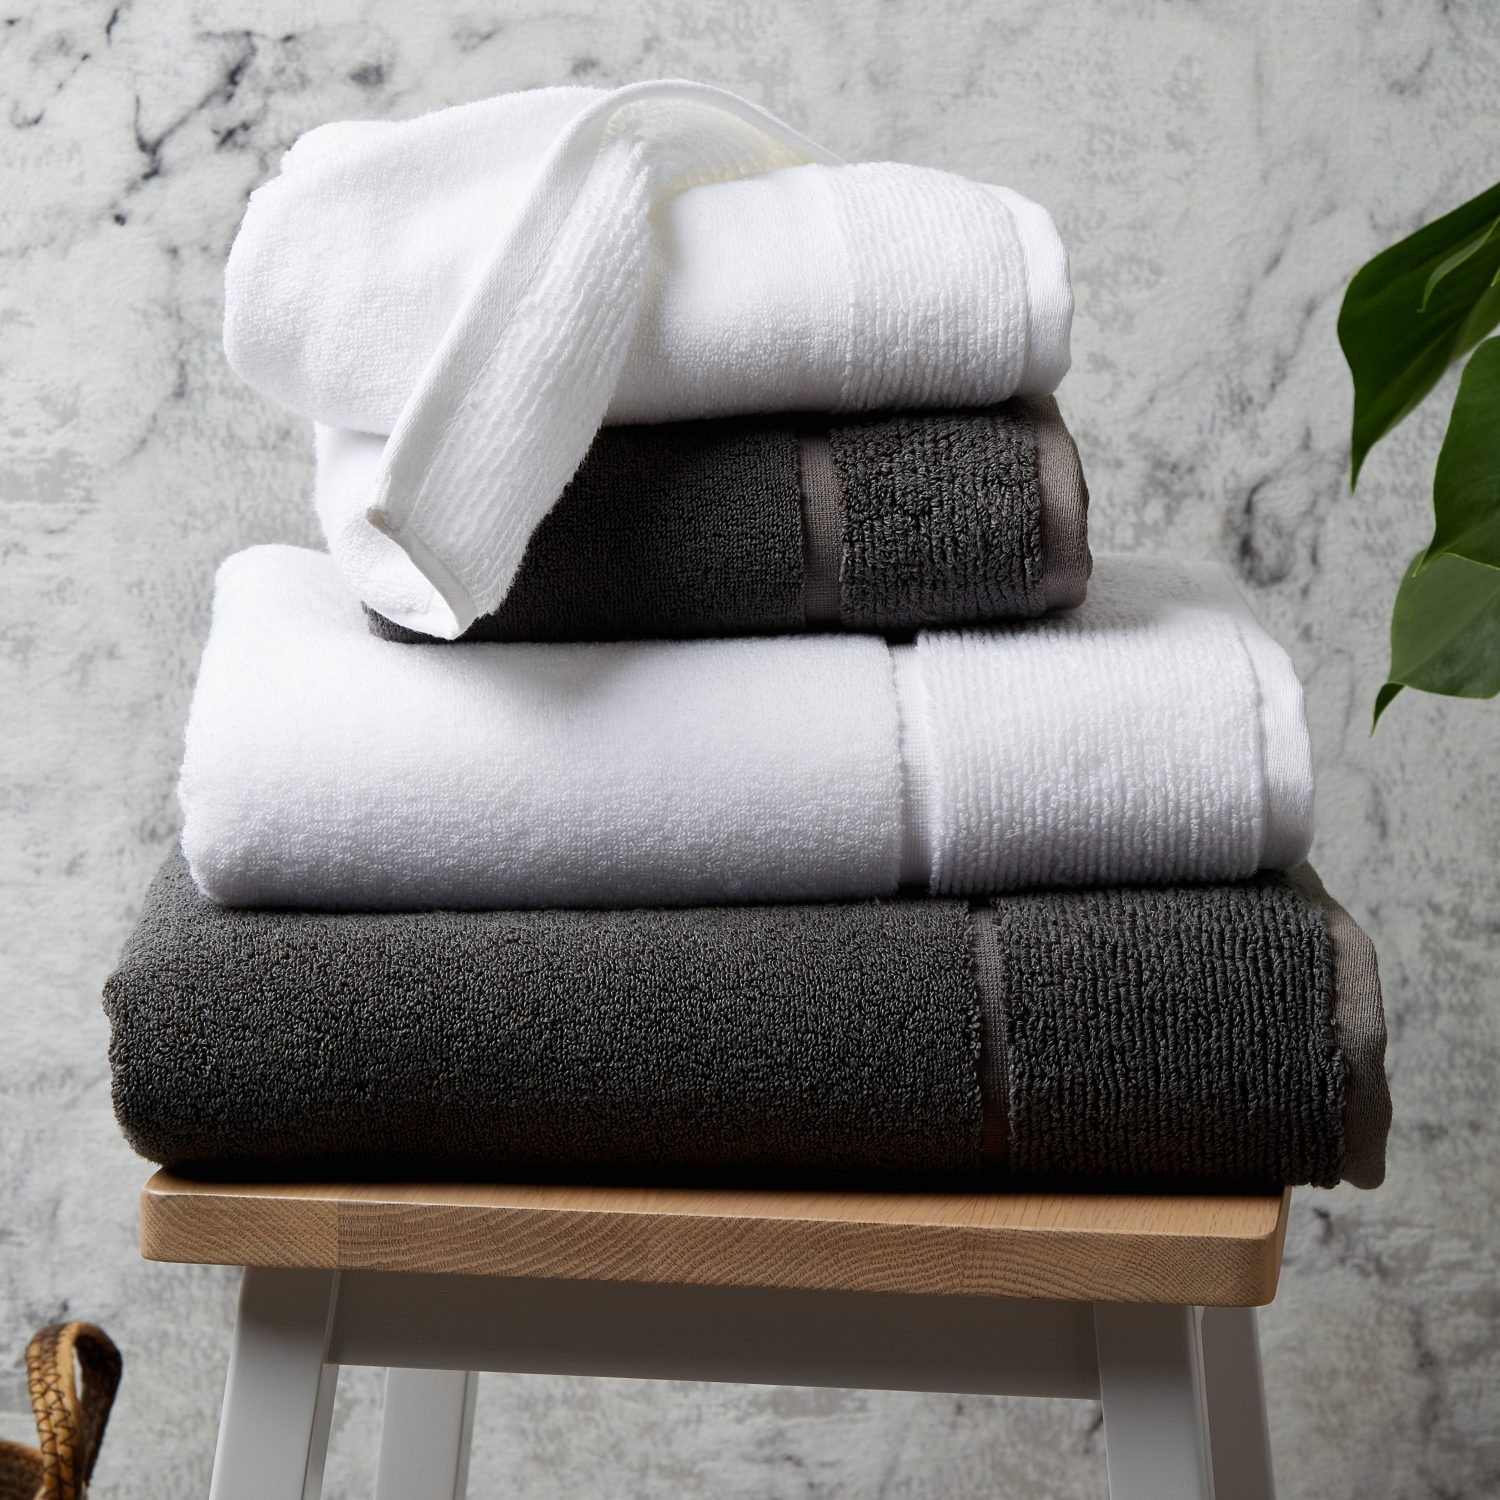 Best Hand Towels For Bathroom 2022